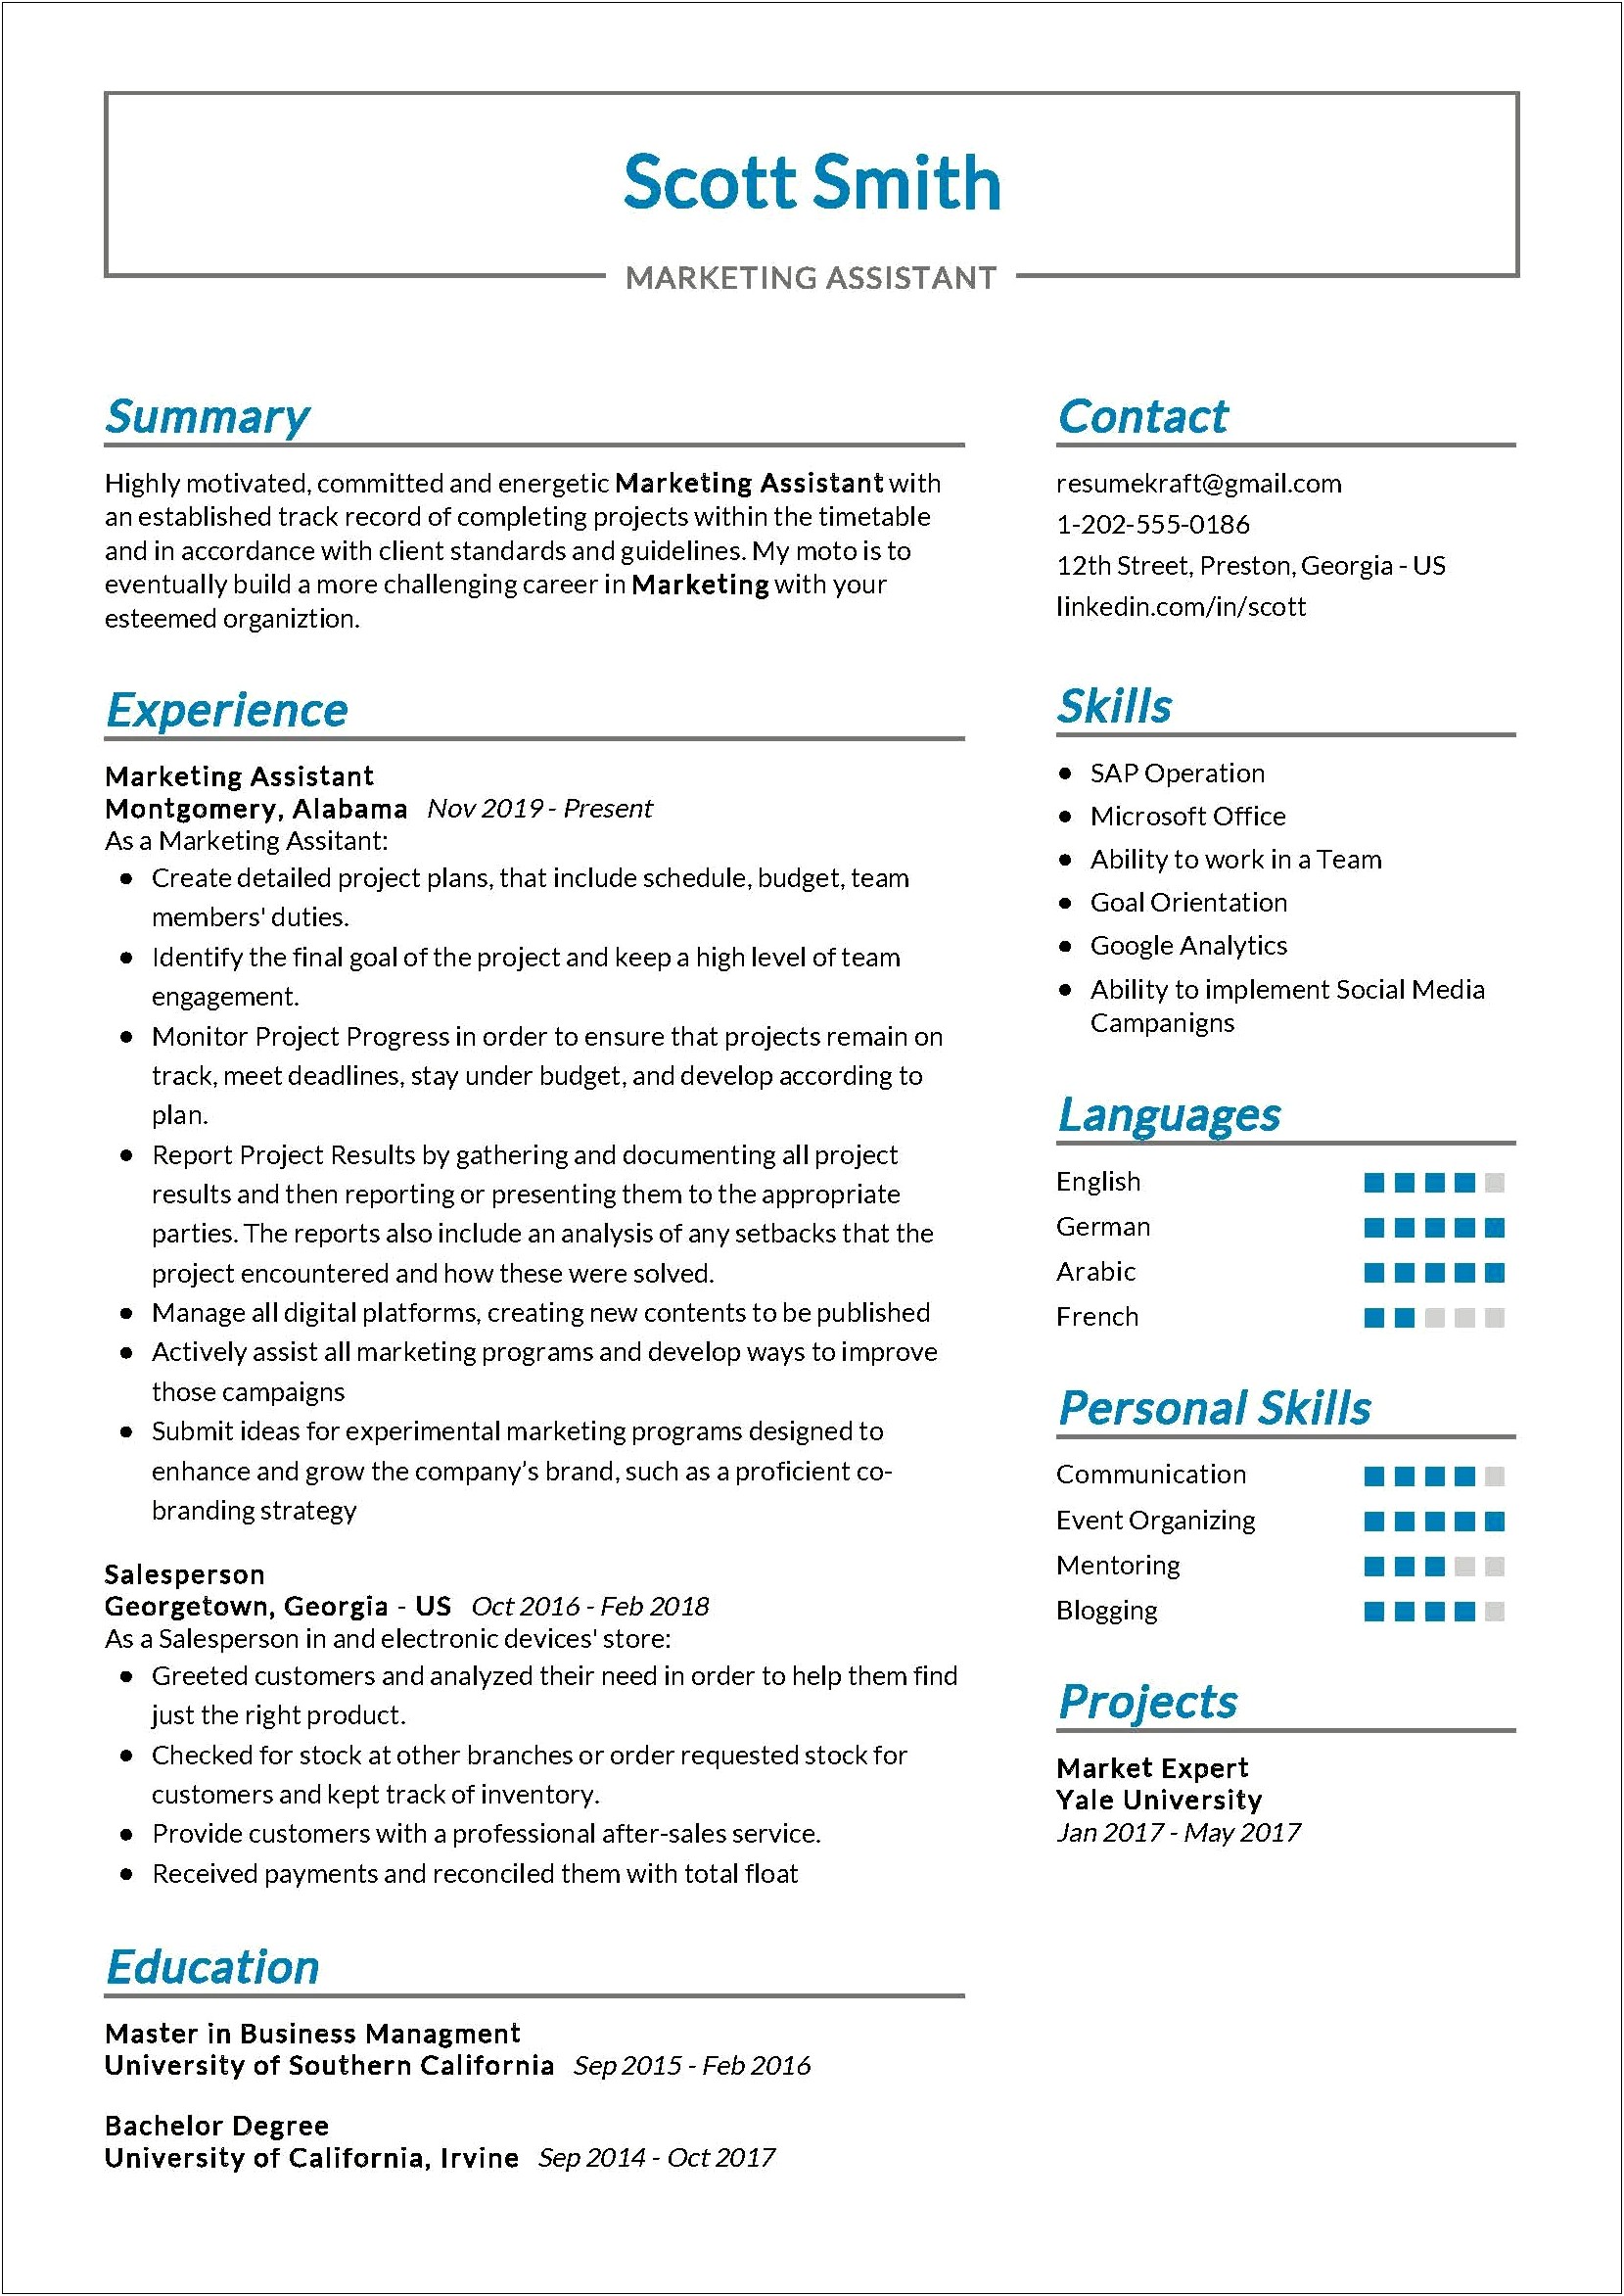 Examples Of Marketing Communications Resumes